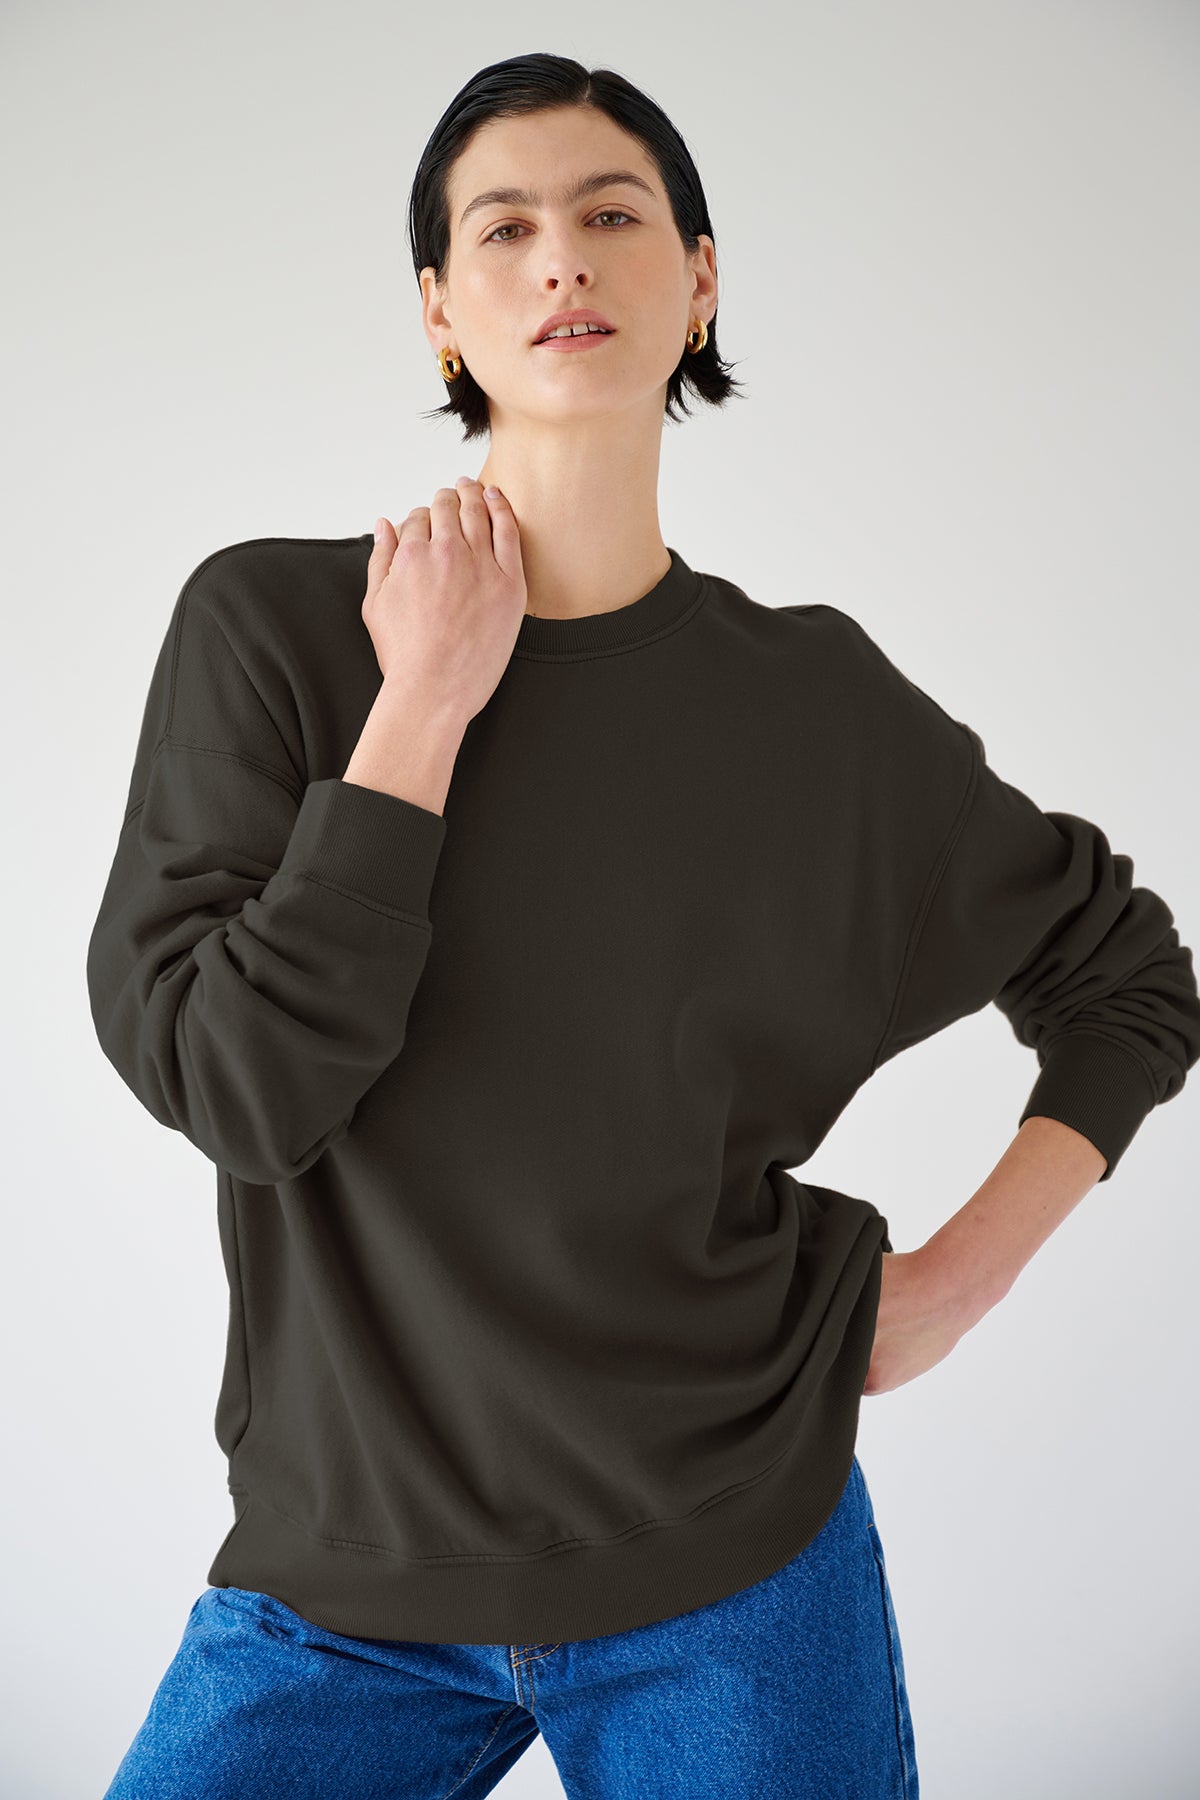 A woman rocking a slouchy black Velvet by Jenny Graham sweatshirt and jeans.-35200281149633